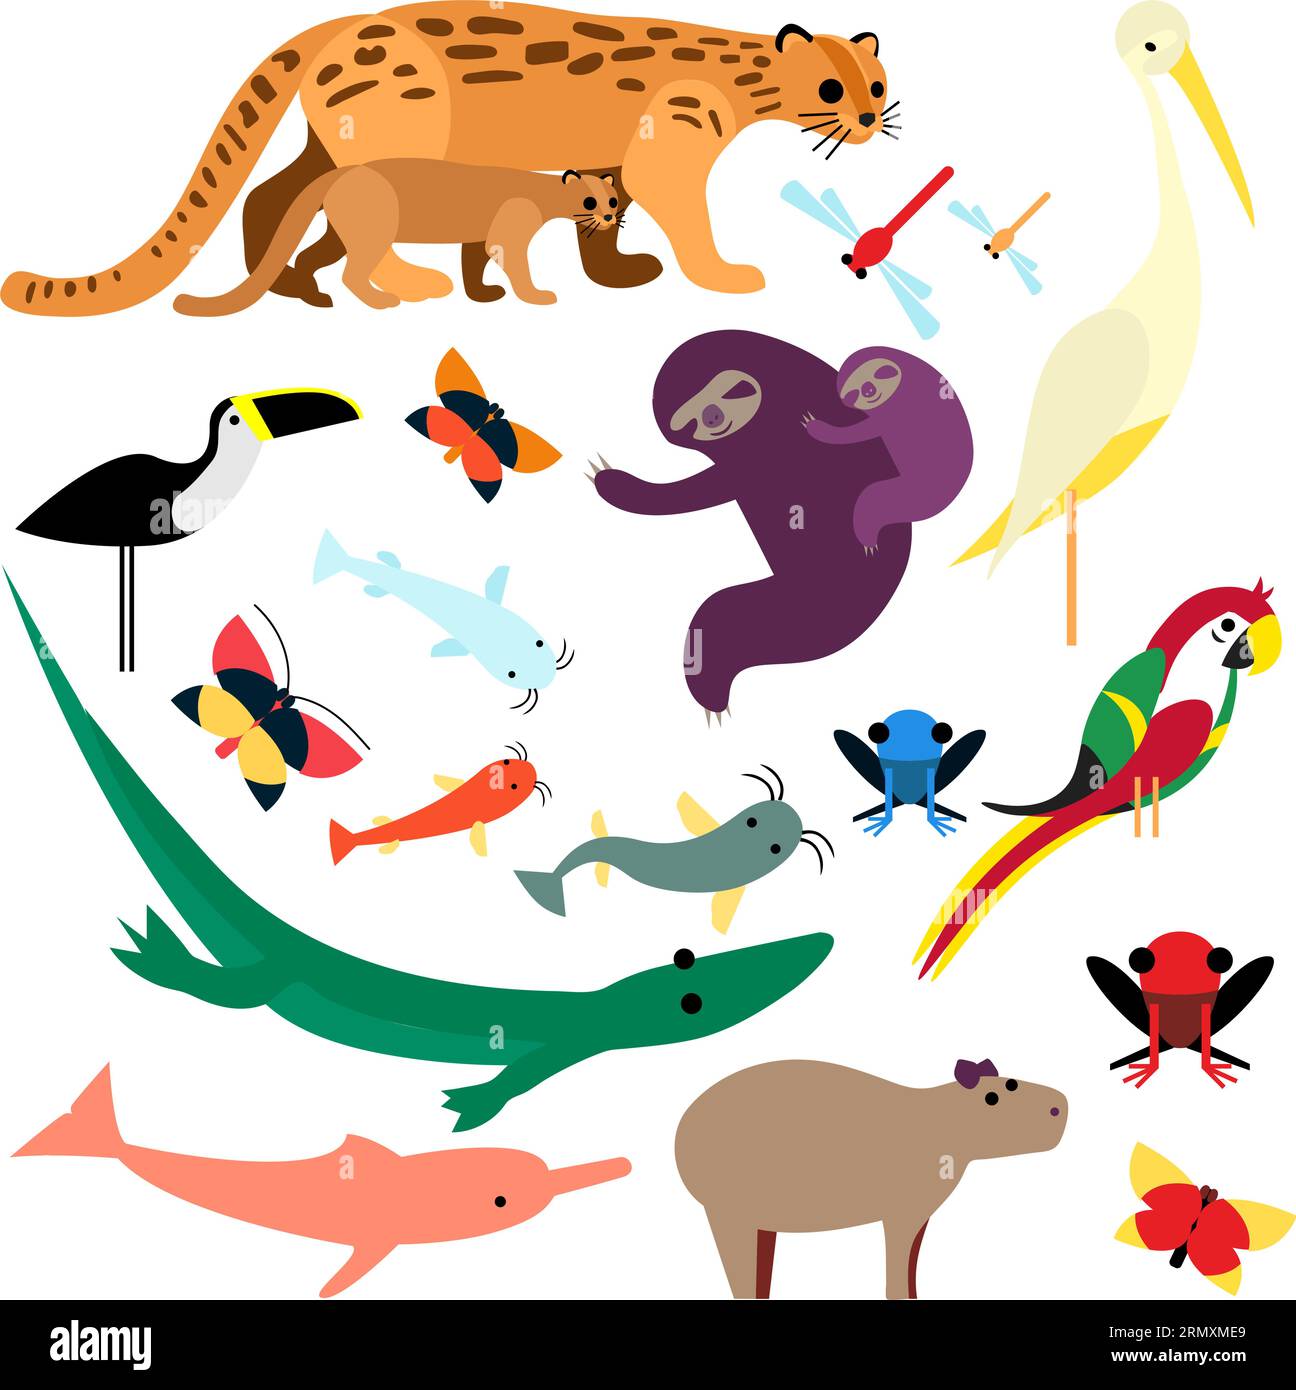 A Collection of Cute and Colorful Tropical Animals for Kids from Tropic transparent png Tigrillo, dragonflies, heron, toucan, butterflies, sloths, fis Stock Vector